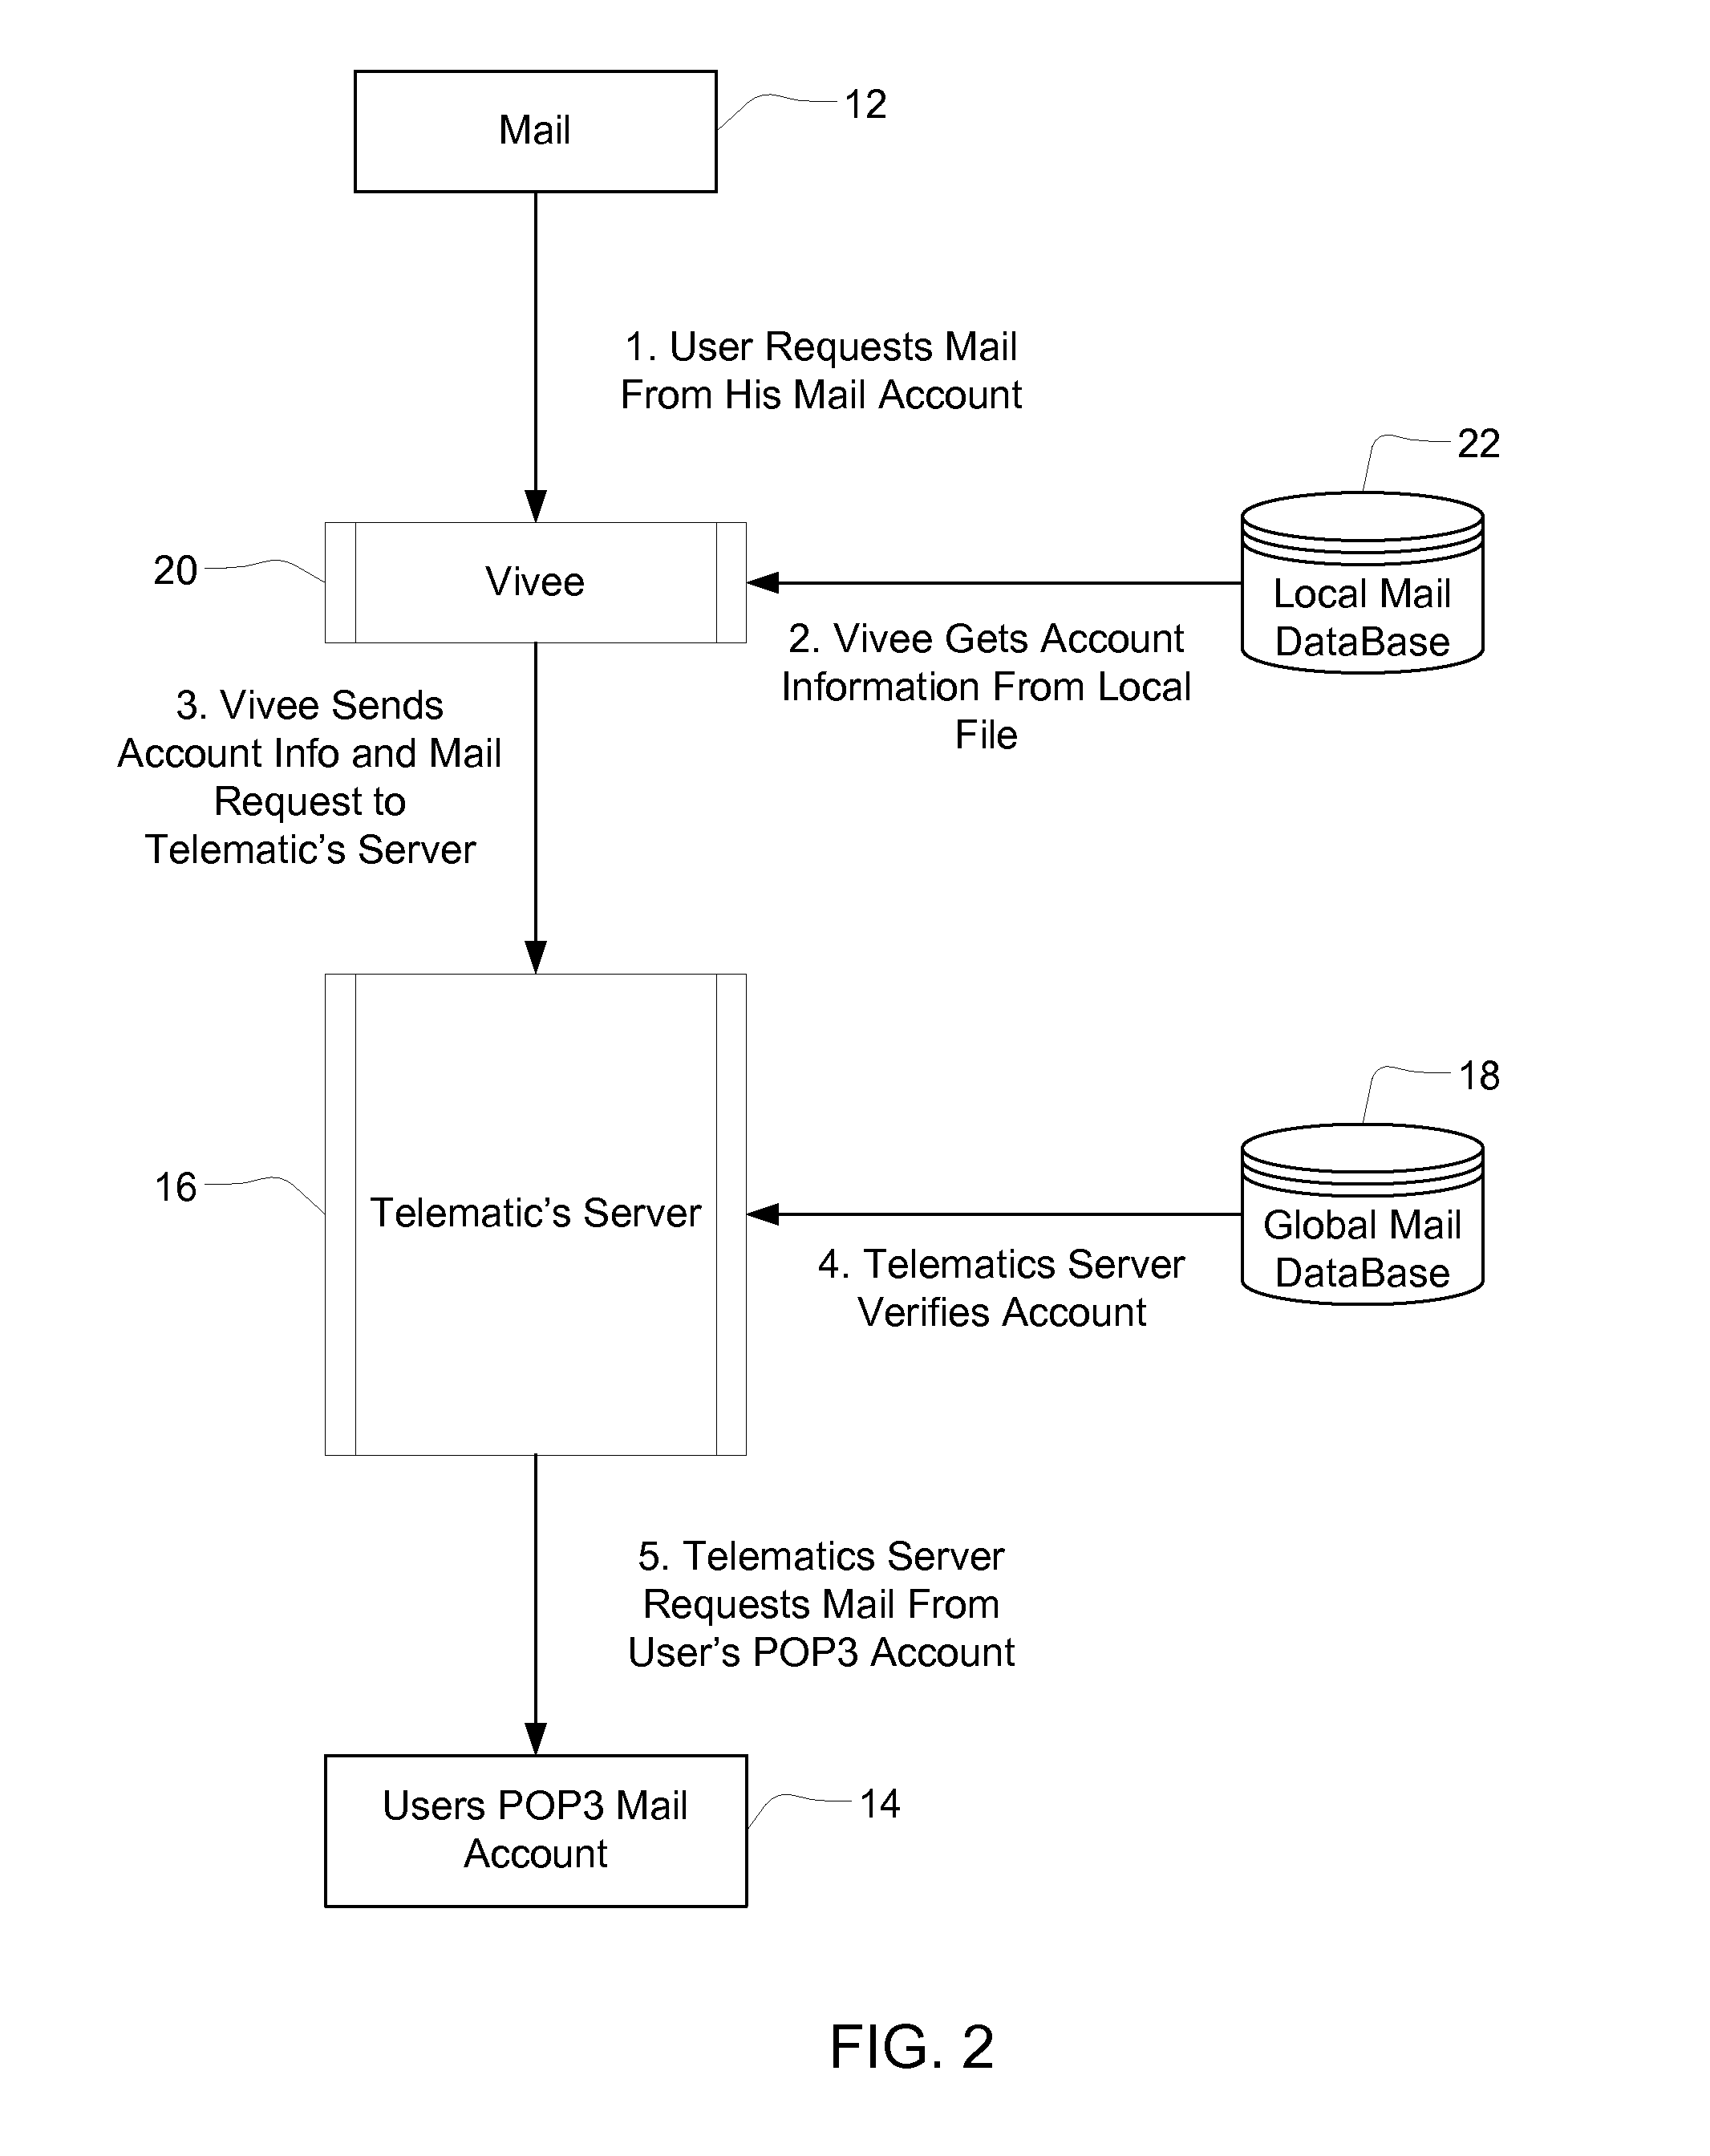 Conversion of text email or SMS message to speech spoken by animated avatar for hands-free reception of email and SMS messages while driving a vehicle